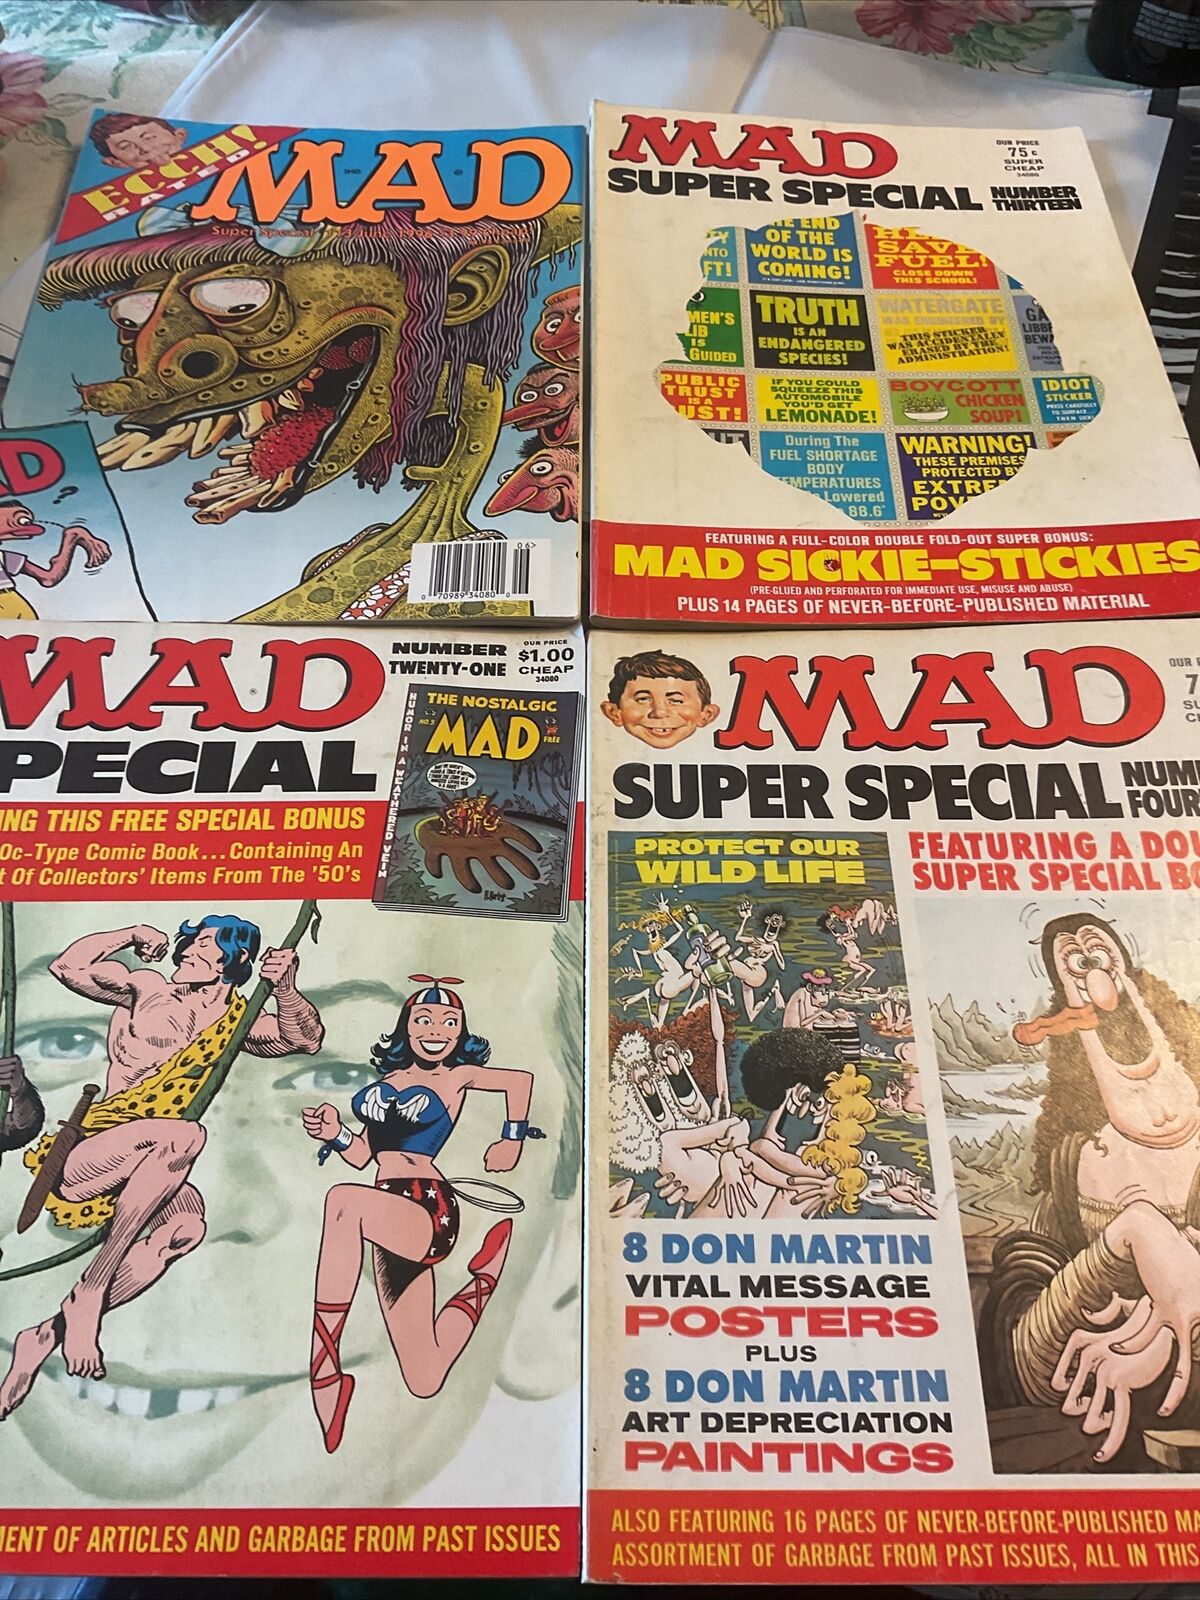 MAD Super Special LOT OF 4 #13#14#21#113